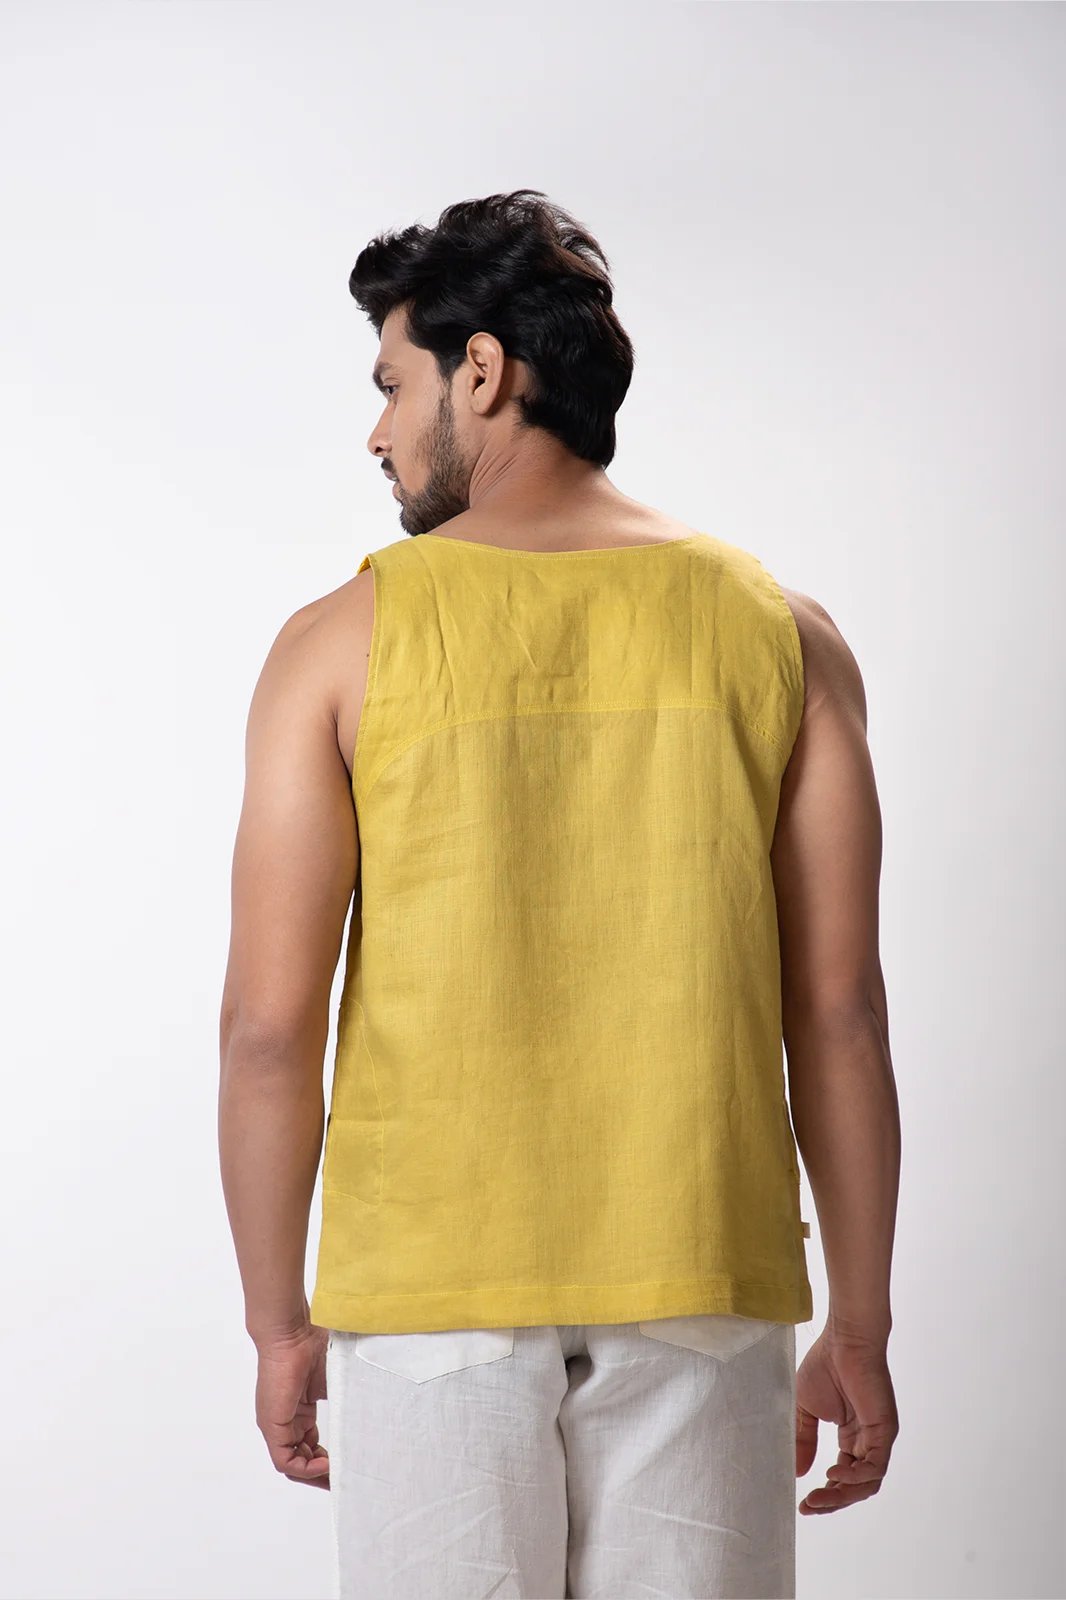 Simoes Tee Linen Olive, pure linen t-shirts, sleeveless t shirts mens, plain t shirts mens, round neck t shirts mens, tshirt for men, tshirt for men, brand t shirt for mens, full t shirt for mens, t shirt for mens, linen t-shirt for mens, linen fabric, Sepia Stories